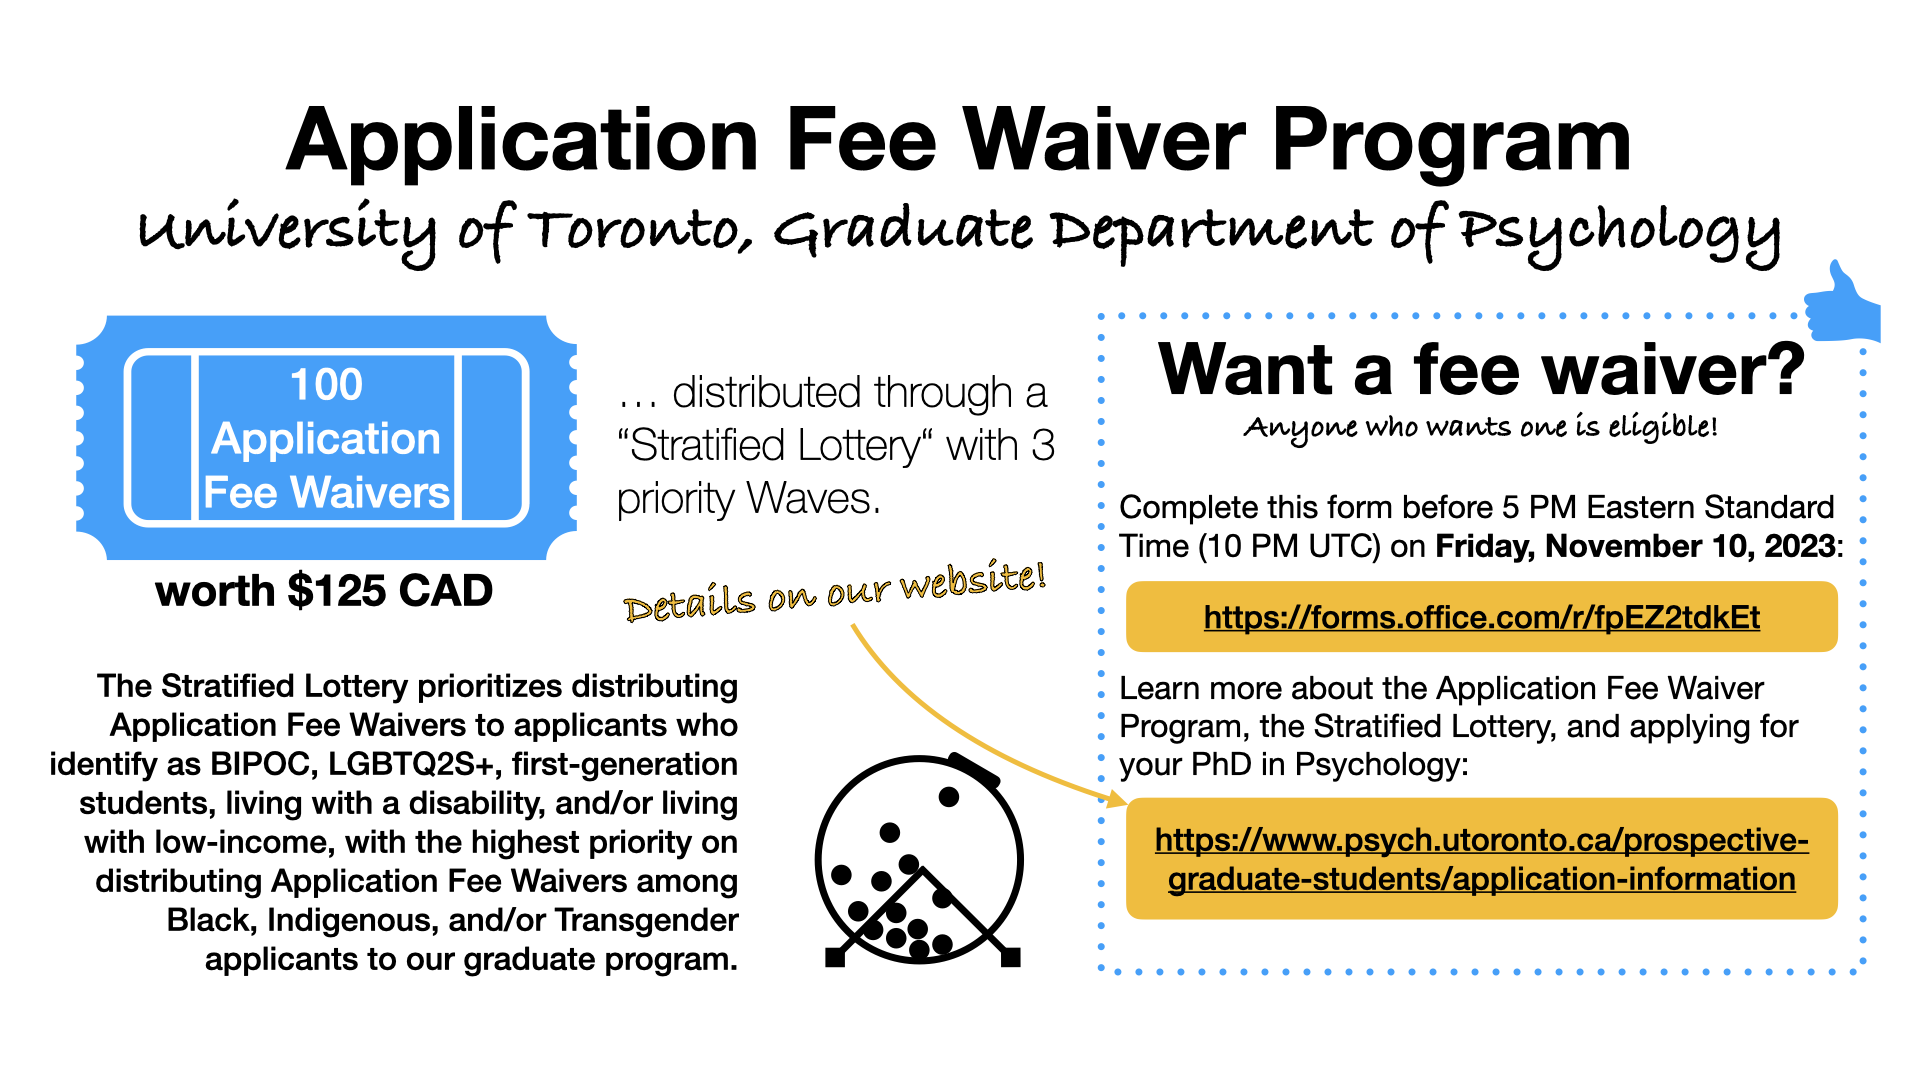 Fee waiver promotional image (text in paragraph below)